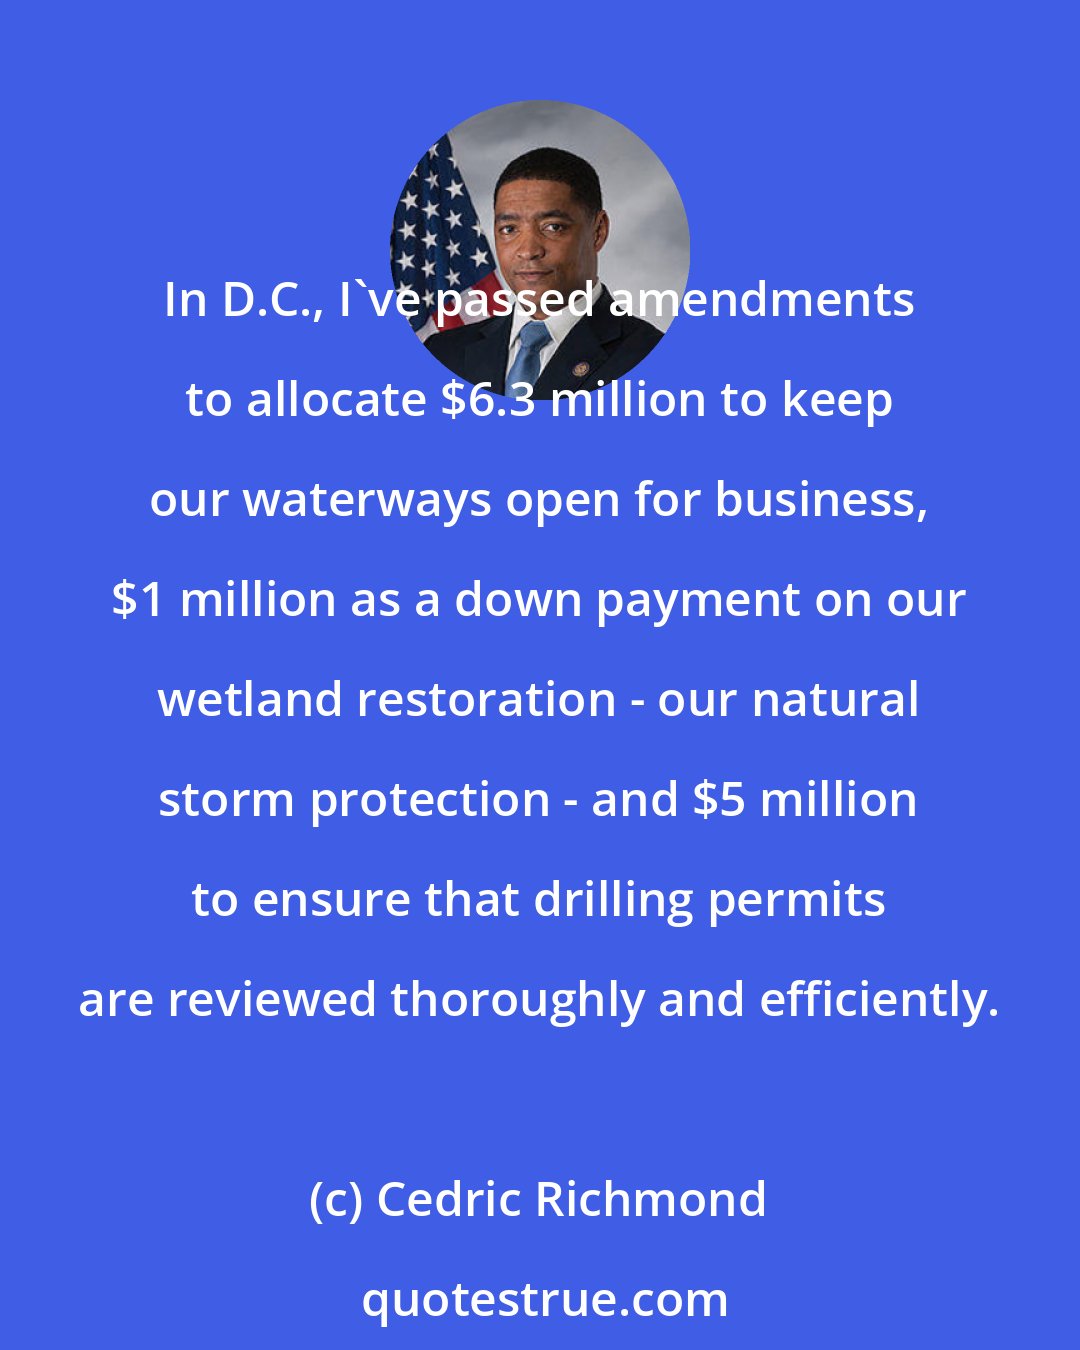 Cedric Richmond: In D.C., I've passed amendments to allocate $6.3 million to keep our waterways open for business, $1 million as a down payment on our wetland restoration - our natural storm protection - and $5 million to ensure that drilling permits are reviewed thoroughly and efficiently.